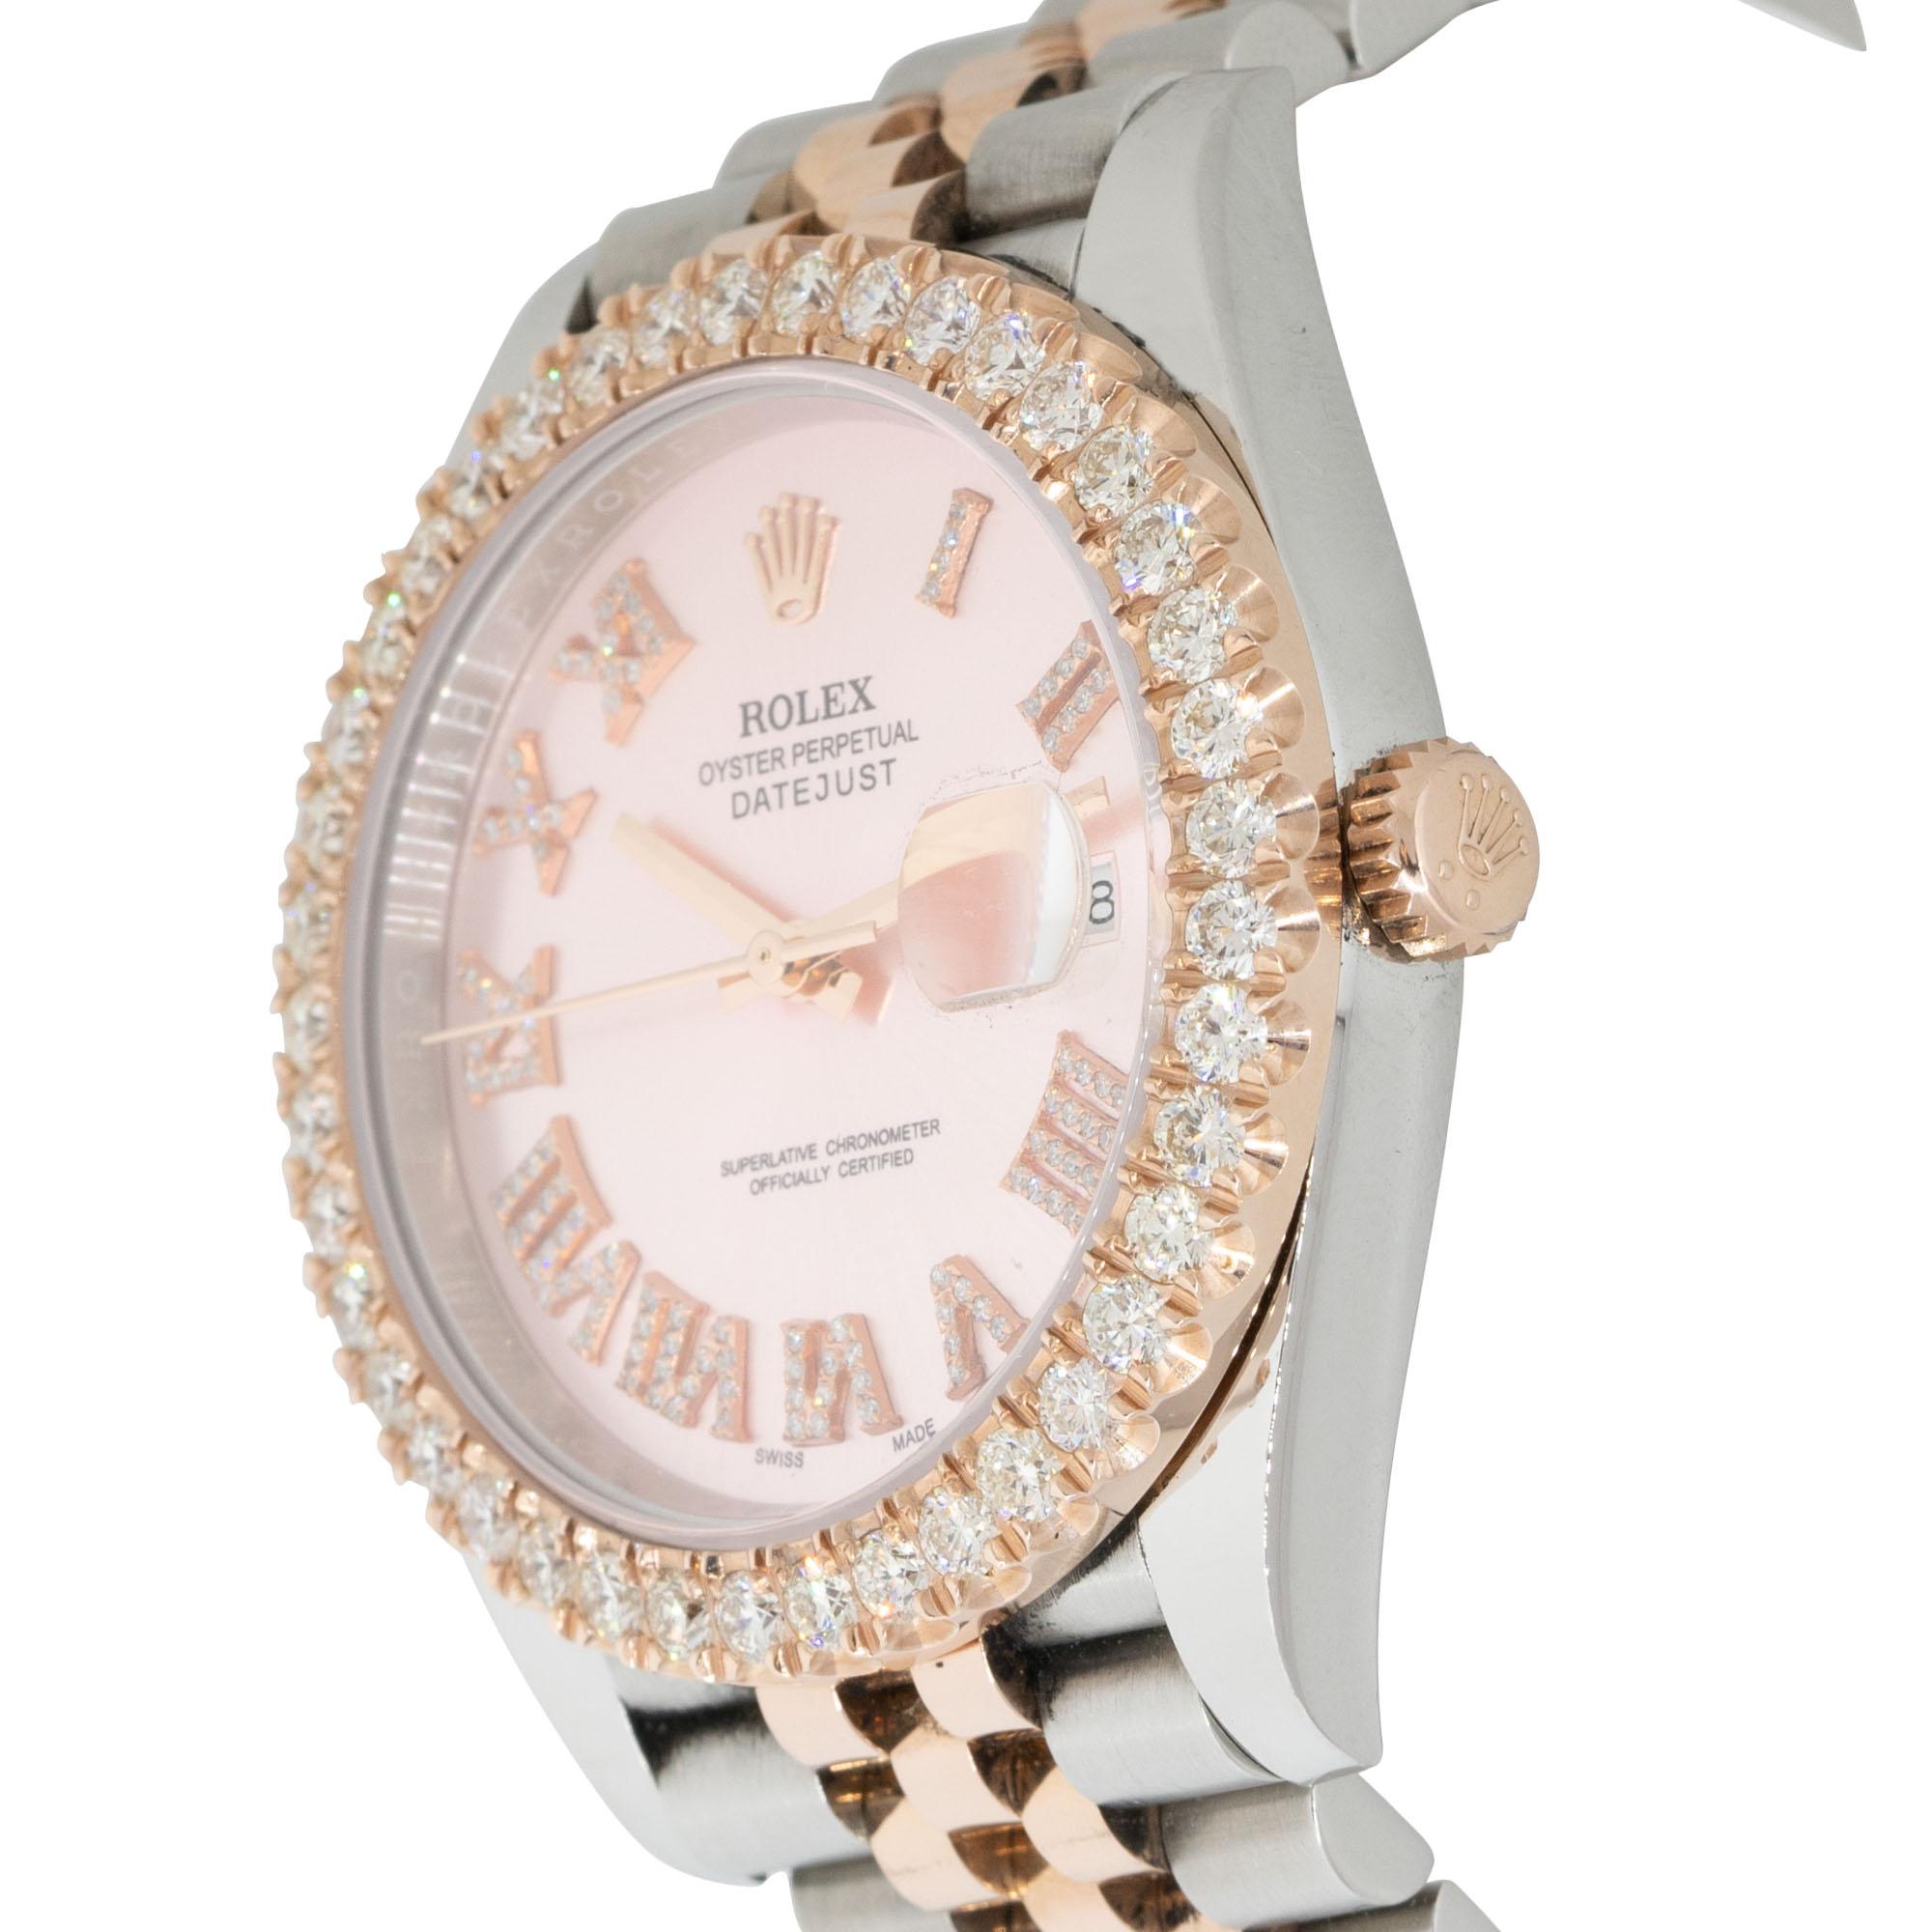 The Rolex 126301 Datejust Two Tone 41mm Rose Dial Diamond Watch is a luxurious and exquisite timepiece that effortlessly blends style with opulence. This watch features a 41mm case with a harmonious two-tone combination of stainless steel and